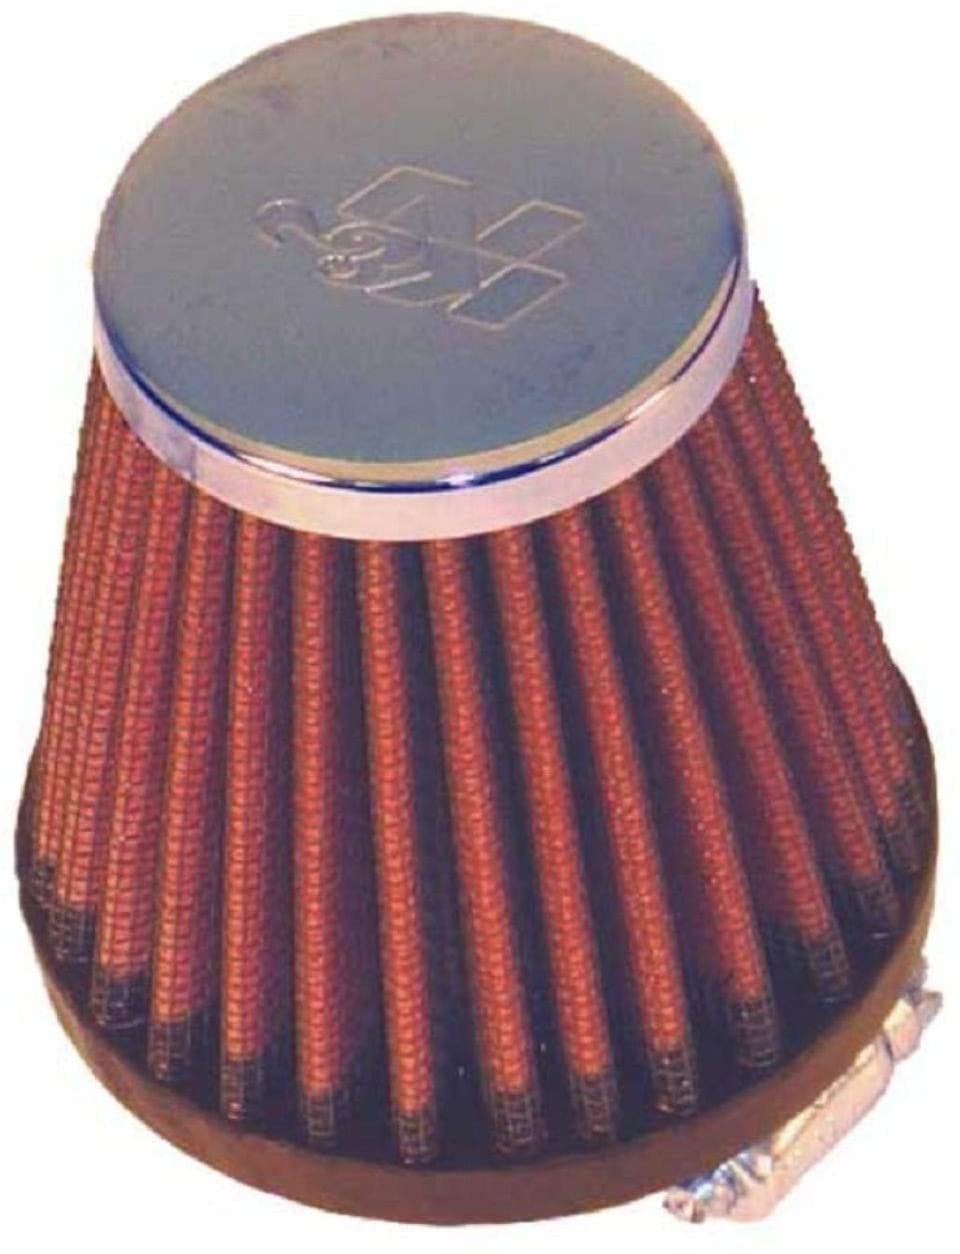 K&N Universal Clamp-On Air Filter: High Performance, Premium, Replacement Engine Filter: Flange Diameter: 1.5625 In, Filter Height: 3 In, Flange Length: 0.625 In, Shape: Round Tapered, RC-2310